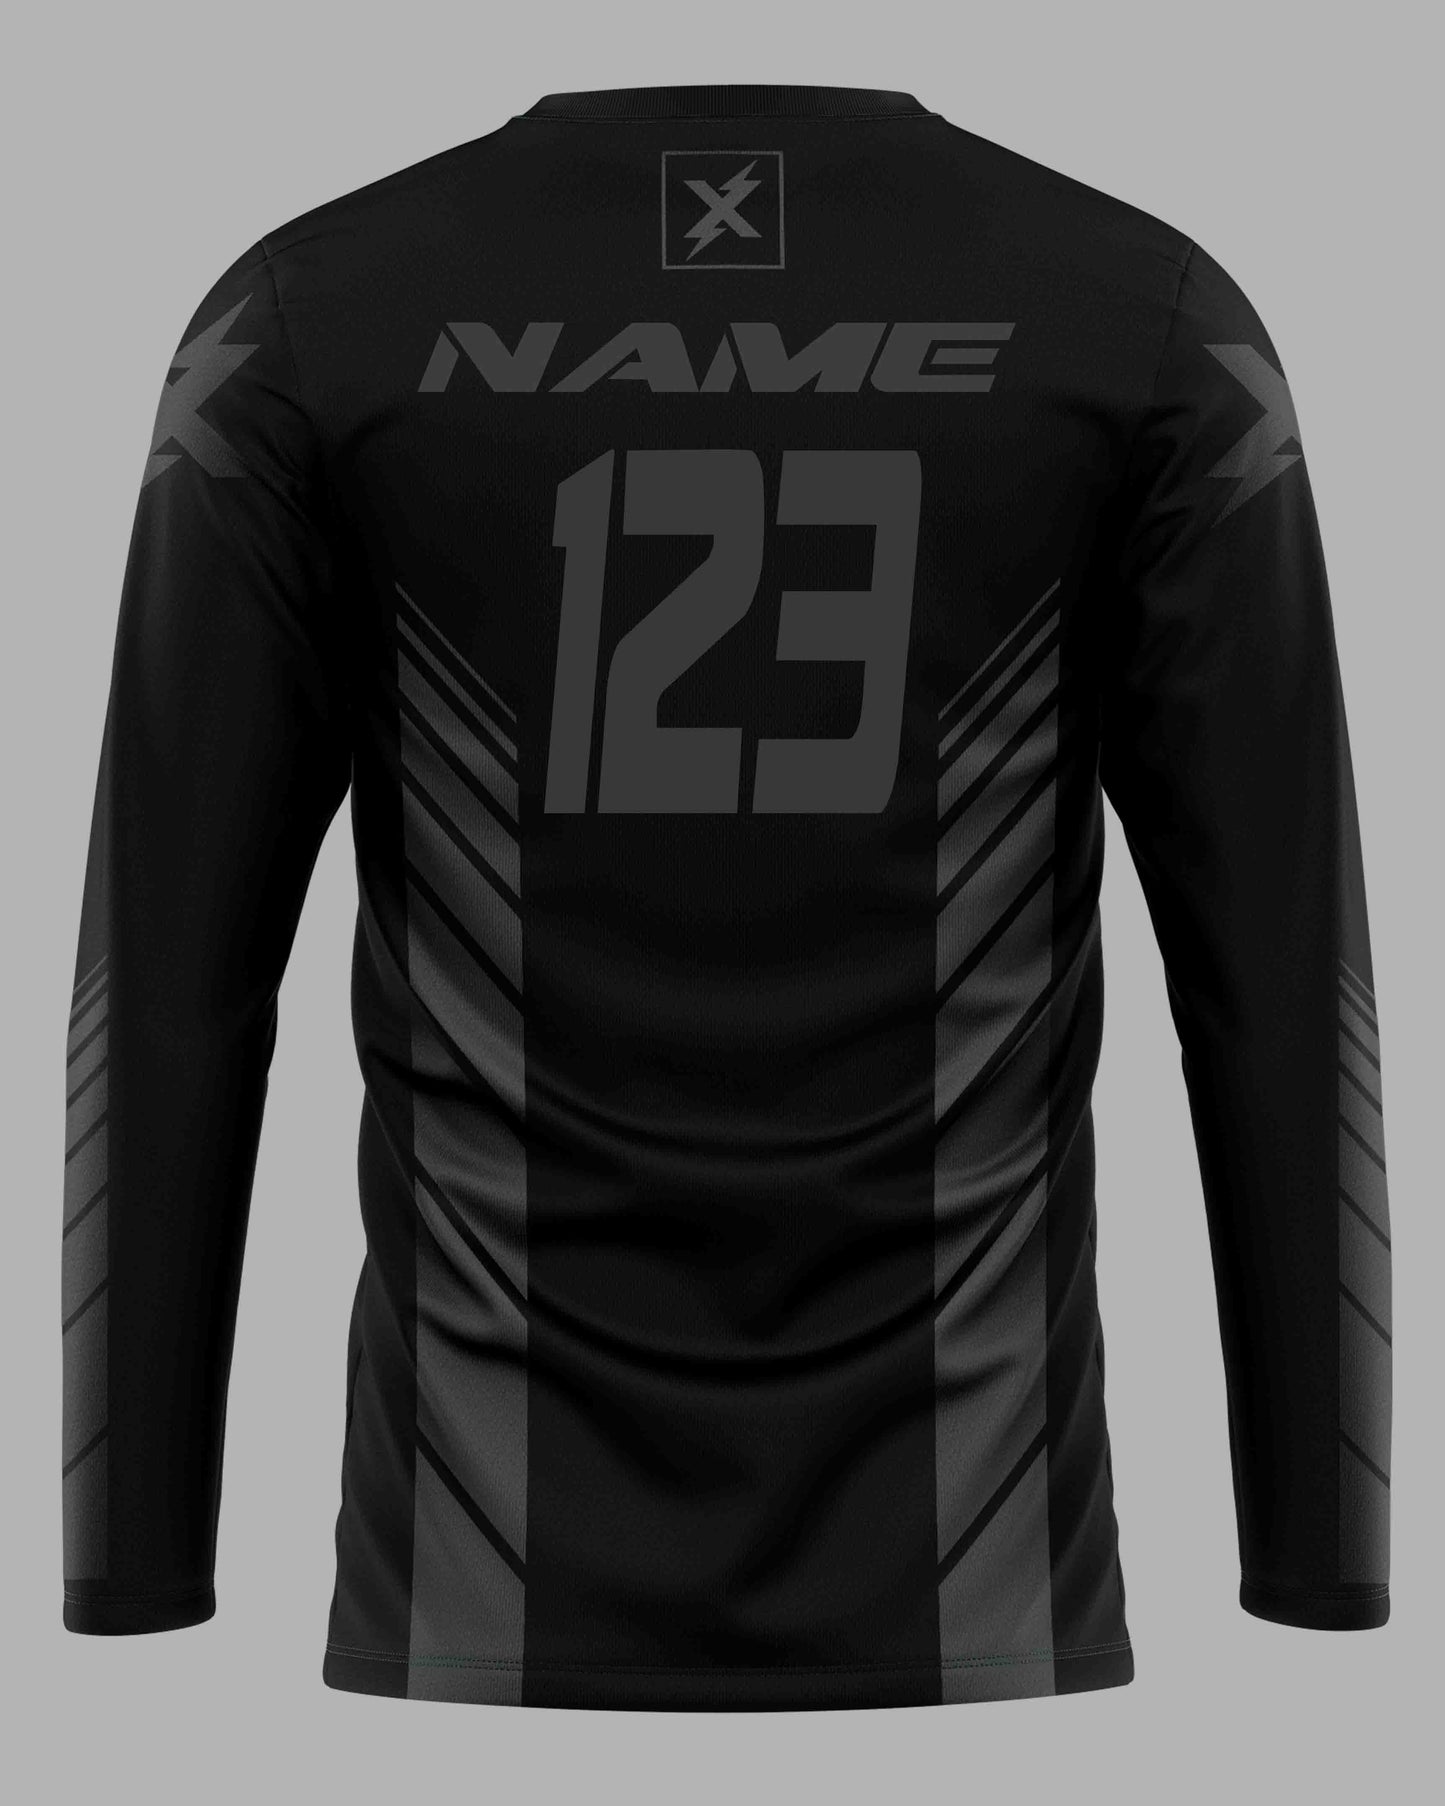 Jersey Speed Lines Ghost Black - FREE Custom Sublimation